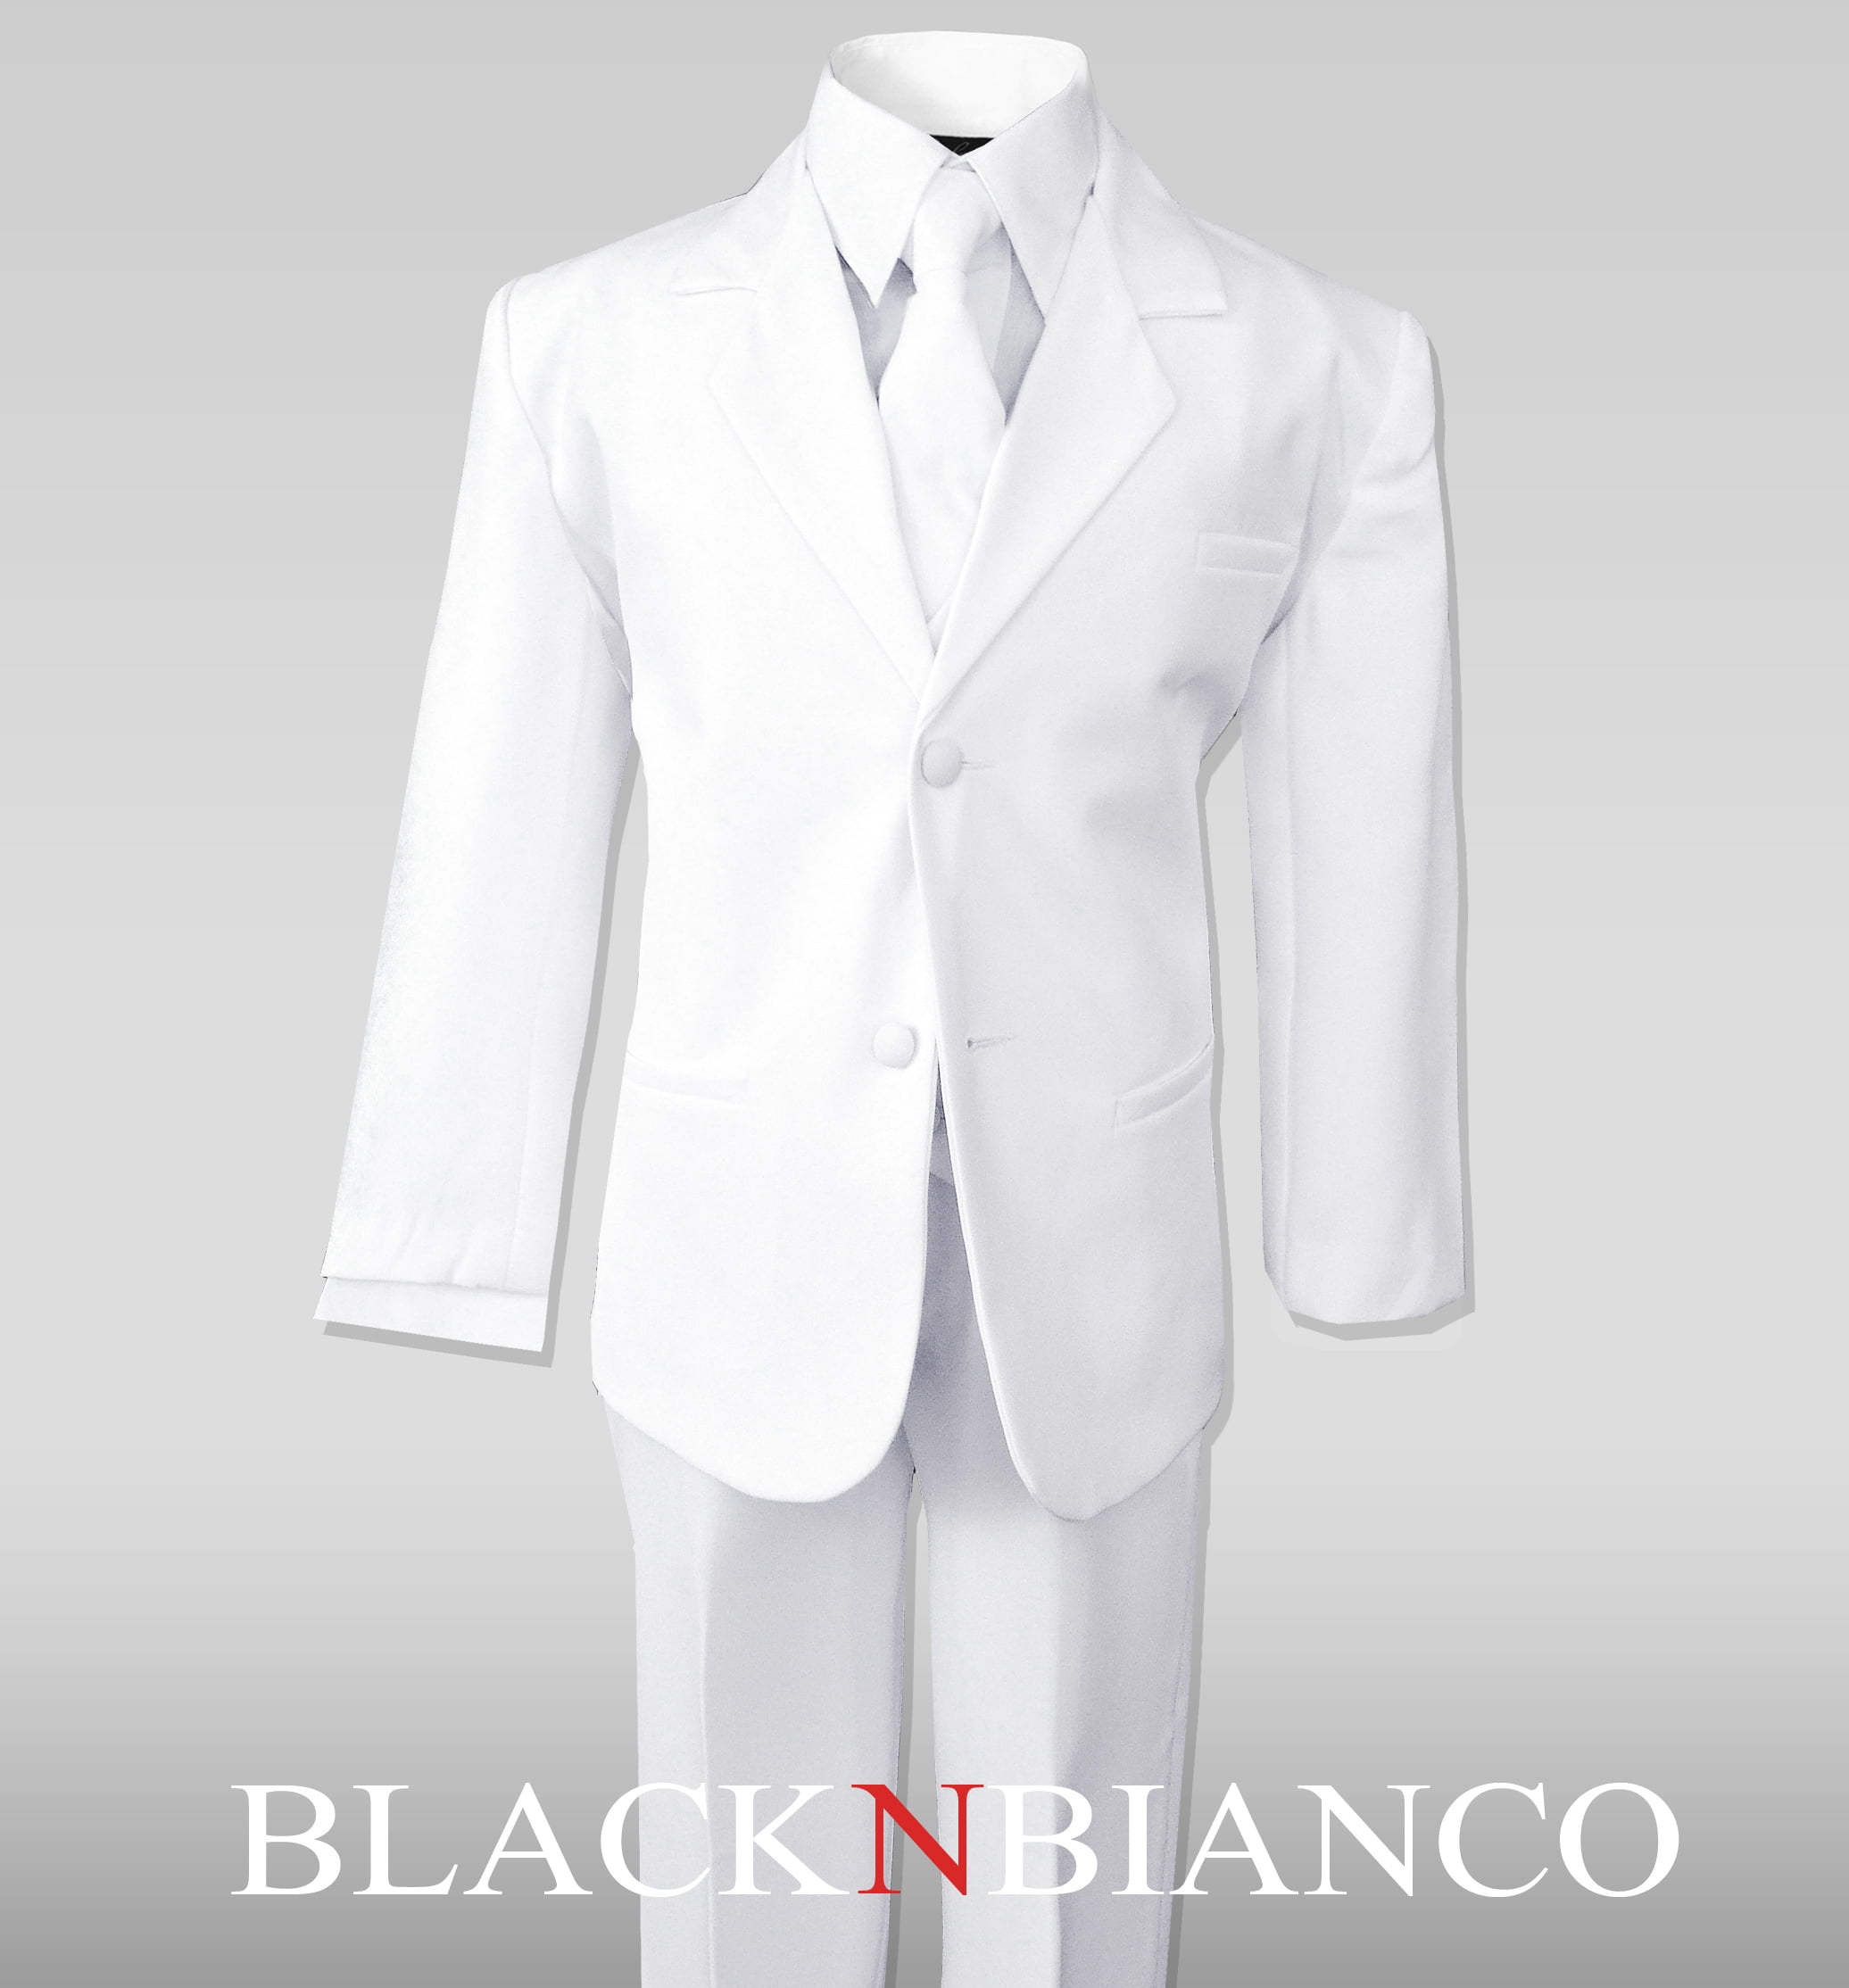 Big Boys Suits in White Complete Outfit Set - Walmart.com